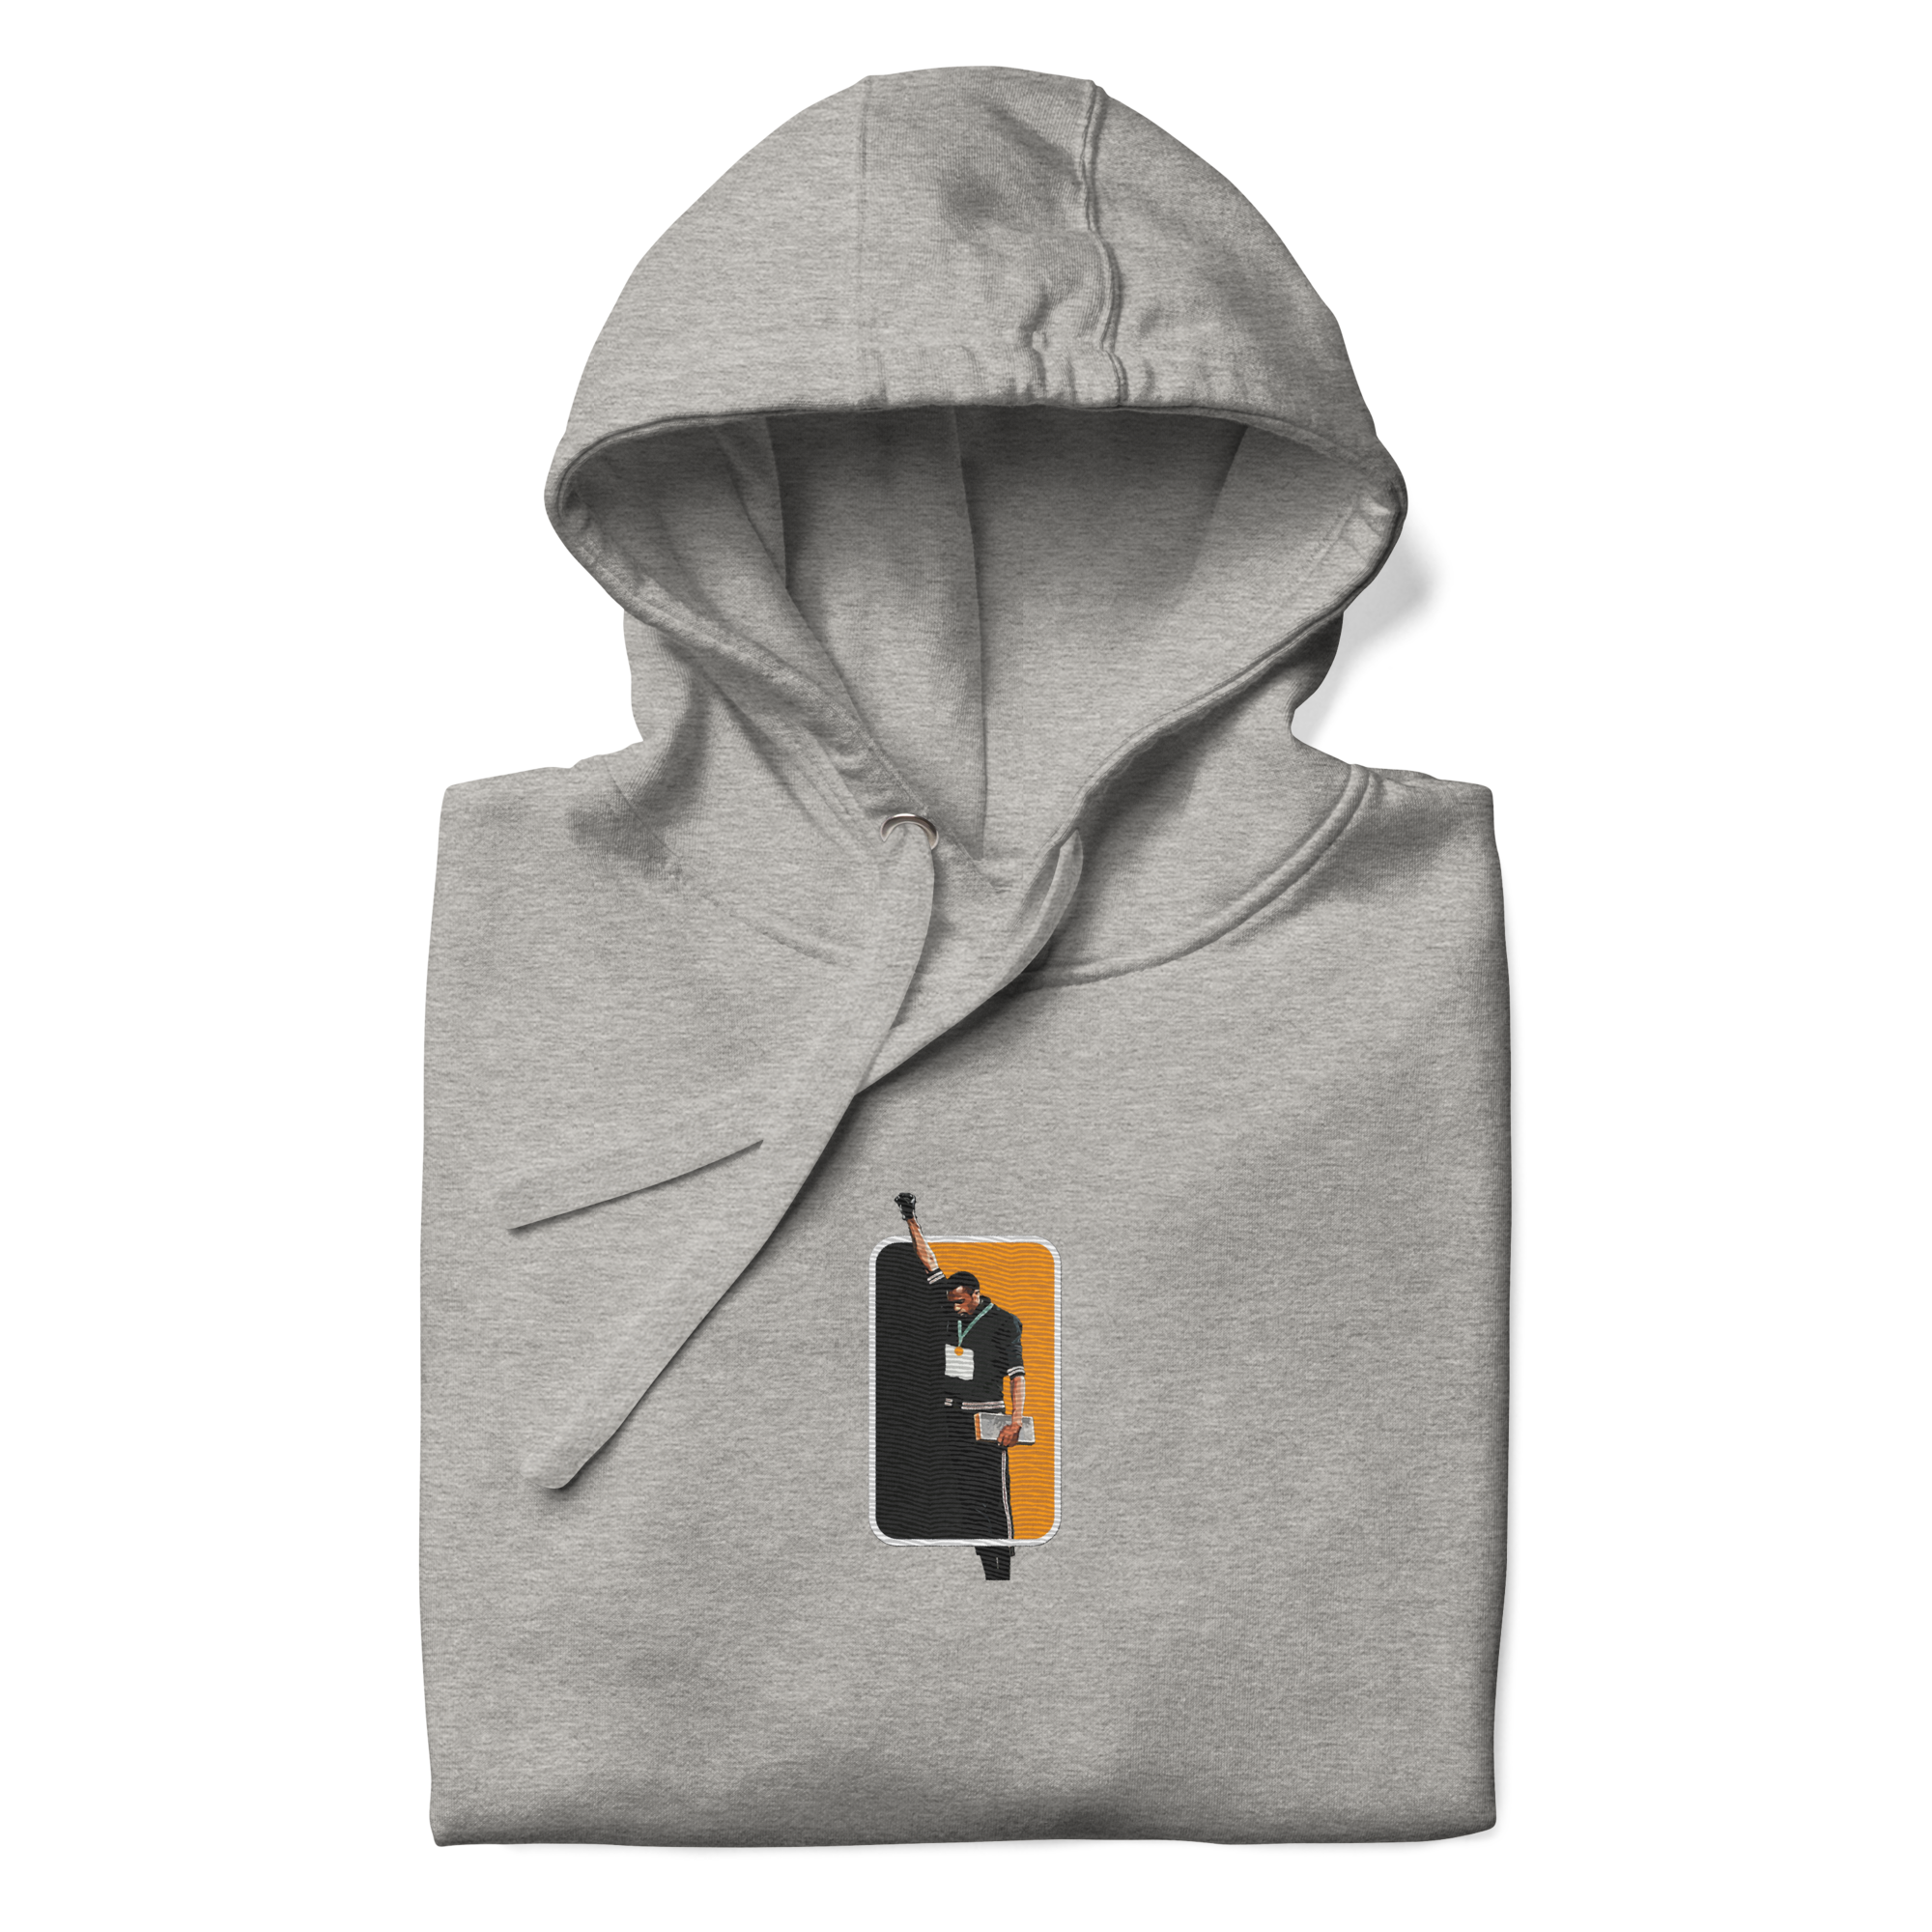 Flatlay image of a premium grey hoodie with an embroidered design of Tommie Smith raising his black-gloved fists in protest during the 1968 Mexico Olympics Men's 200m medal ceremony.